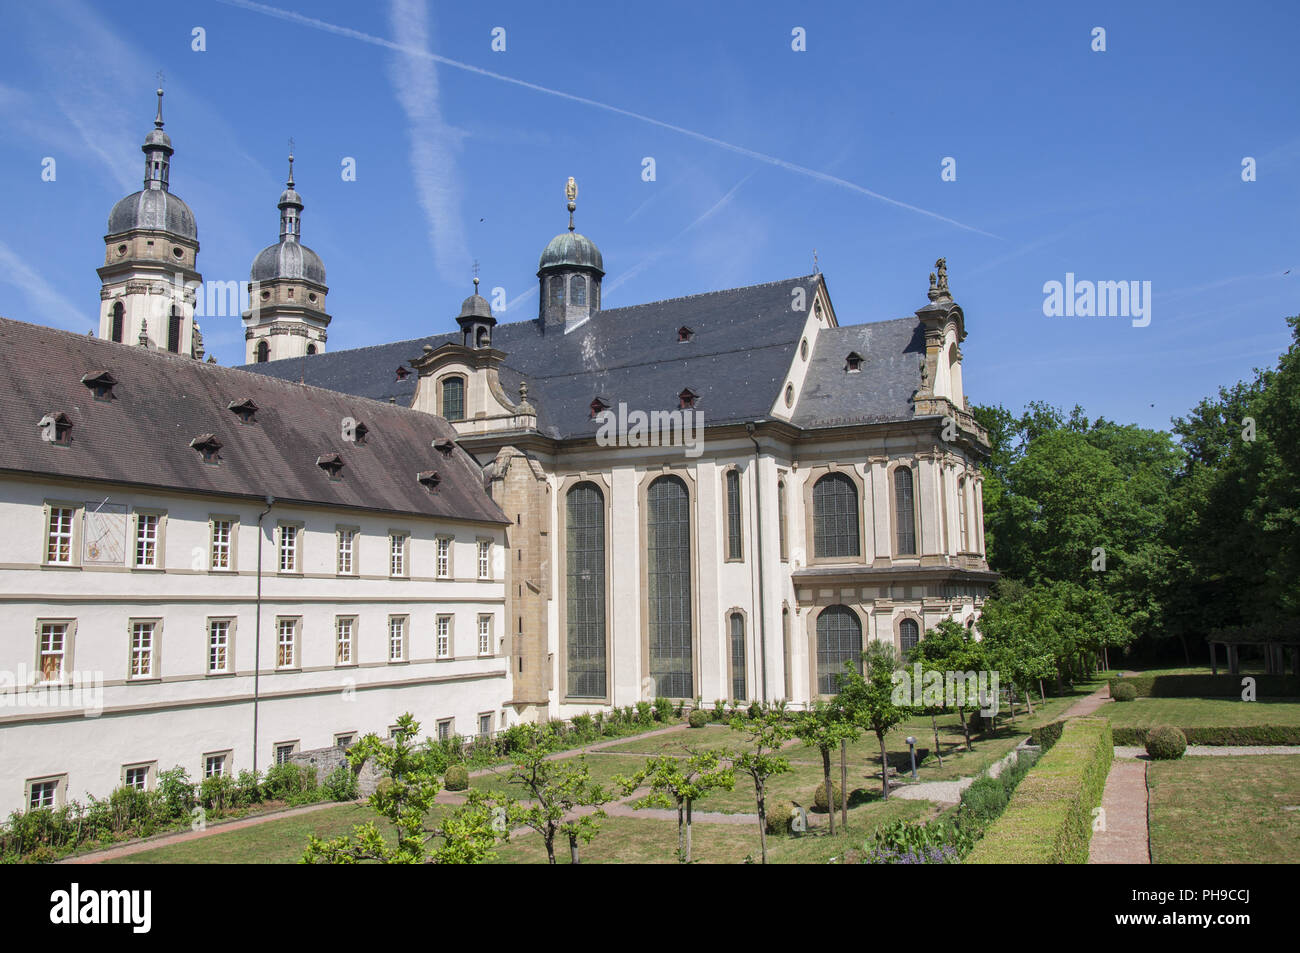 Monastery Schoental in the Jagst valley, Germany Stock Photo